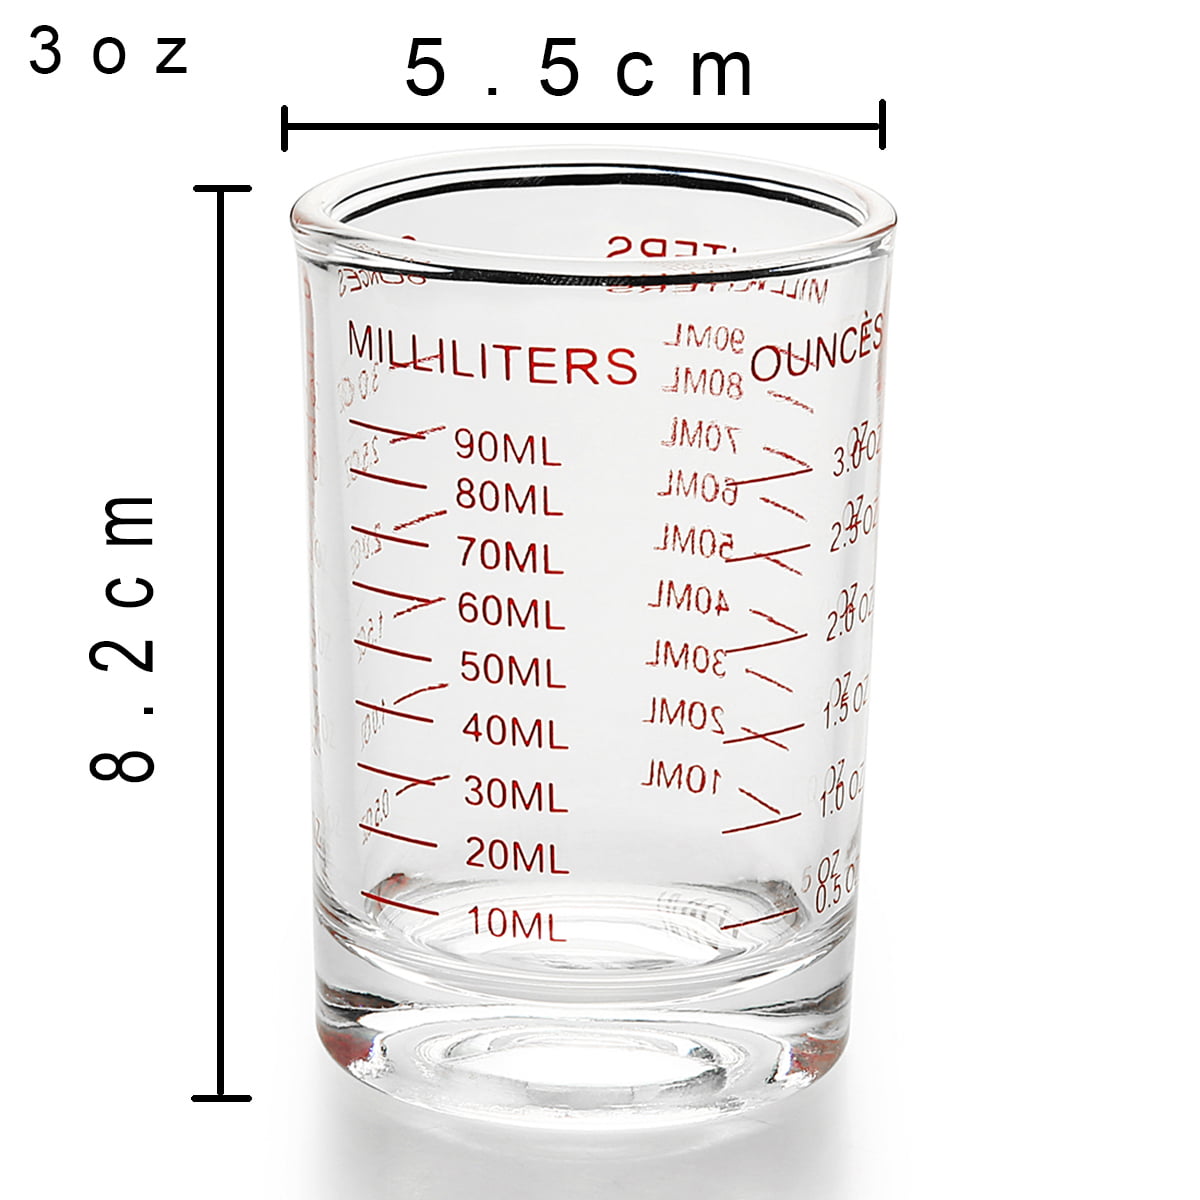 Bcnmviku Espresso Shot Glasses Measuring Cup: Ideal for Baristas and  Ristretto Lovers